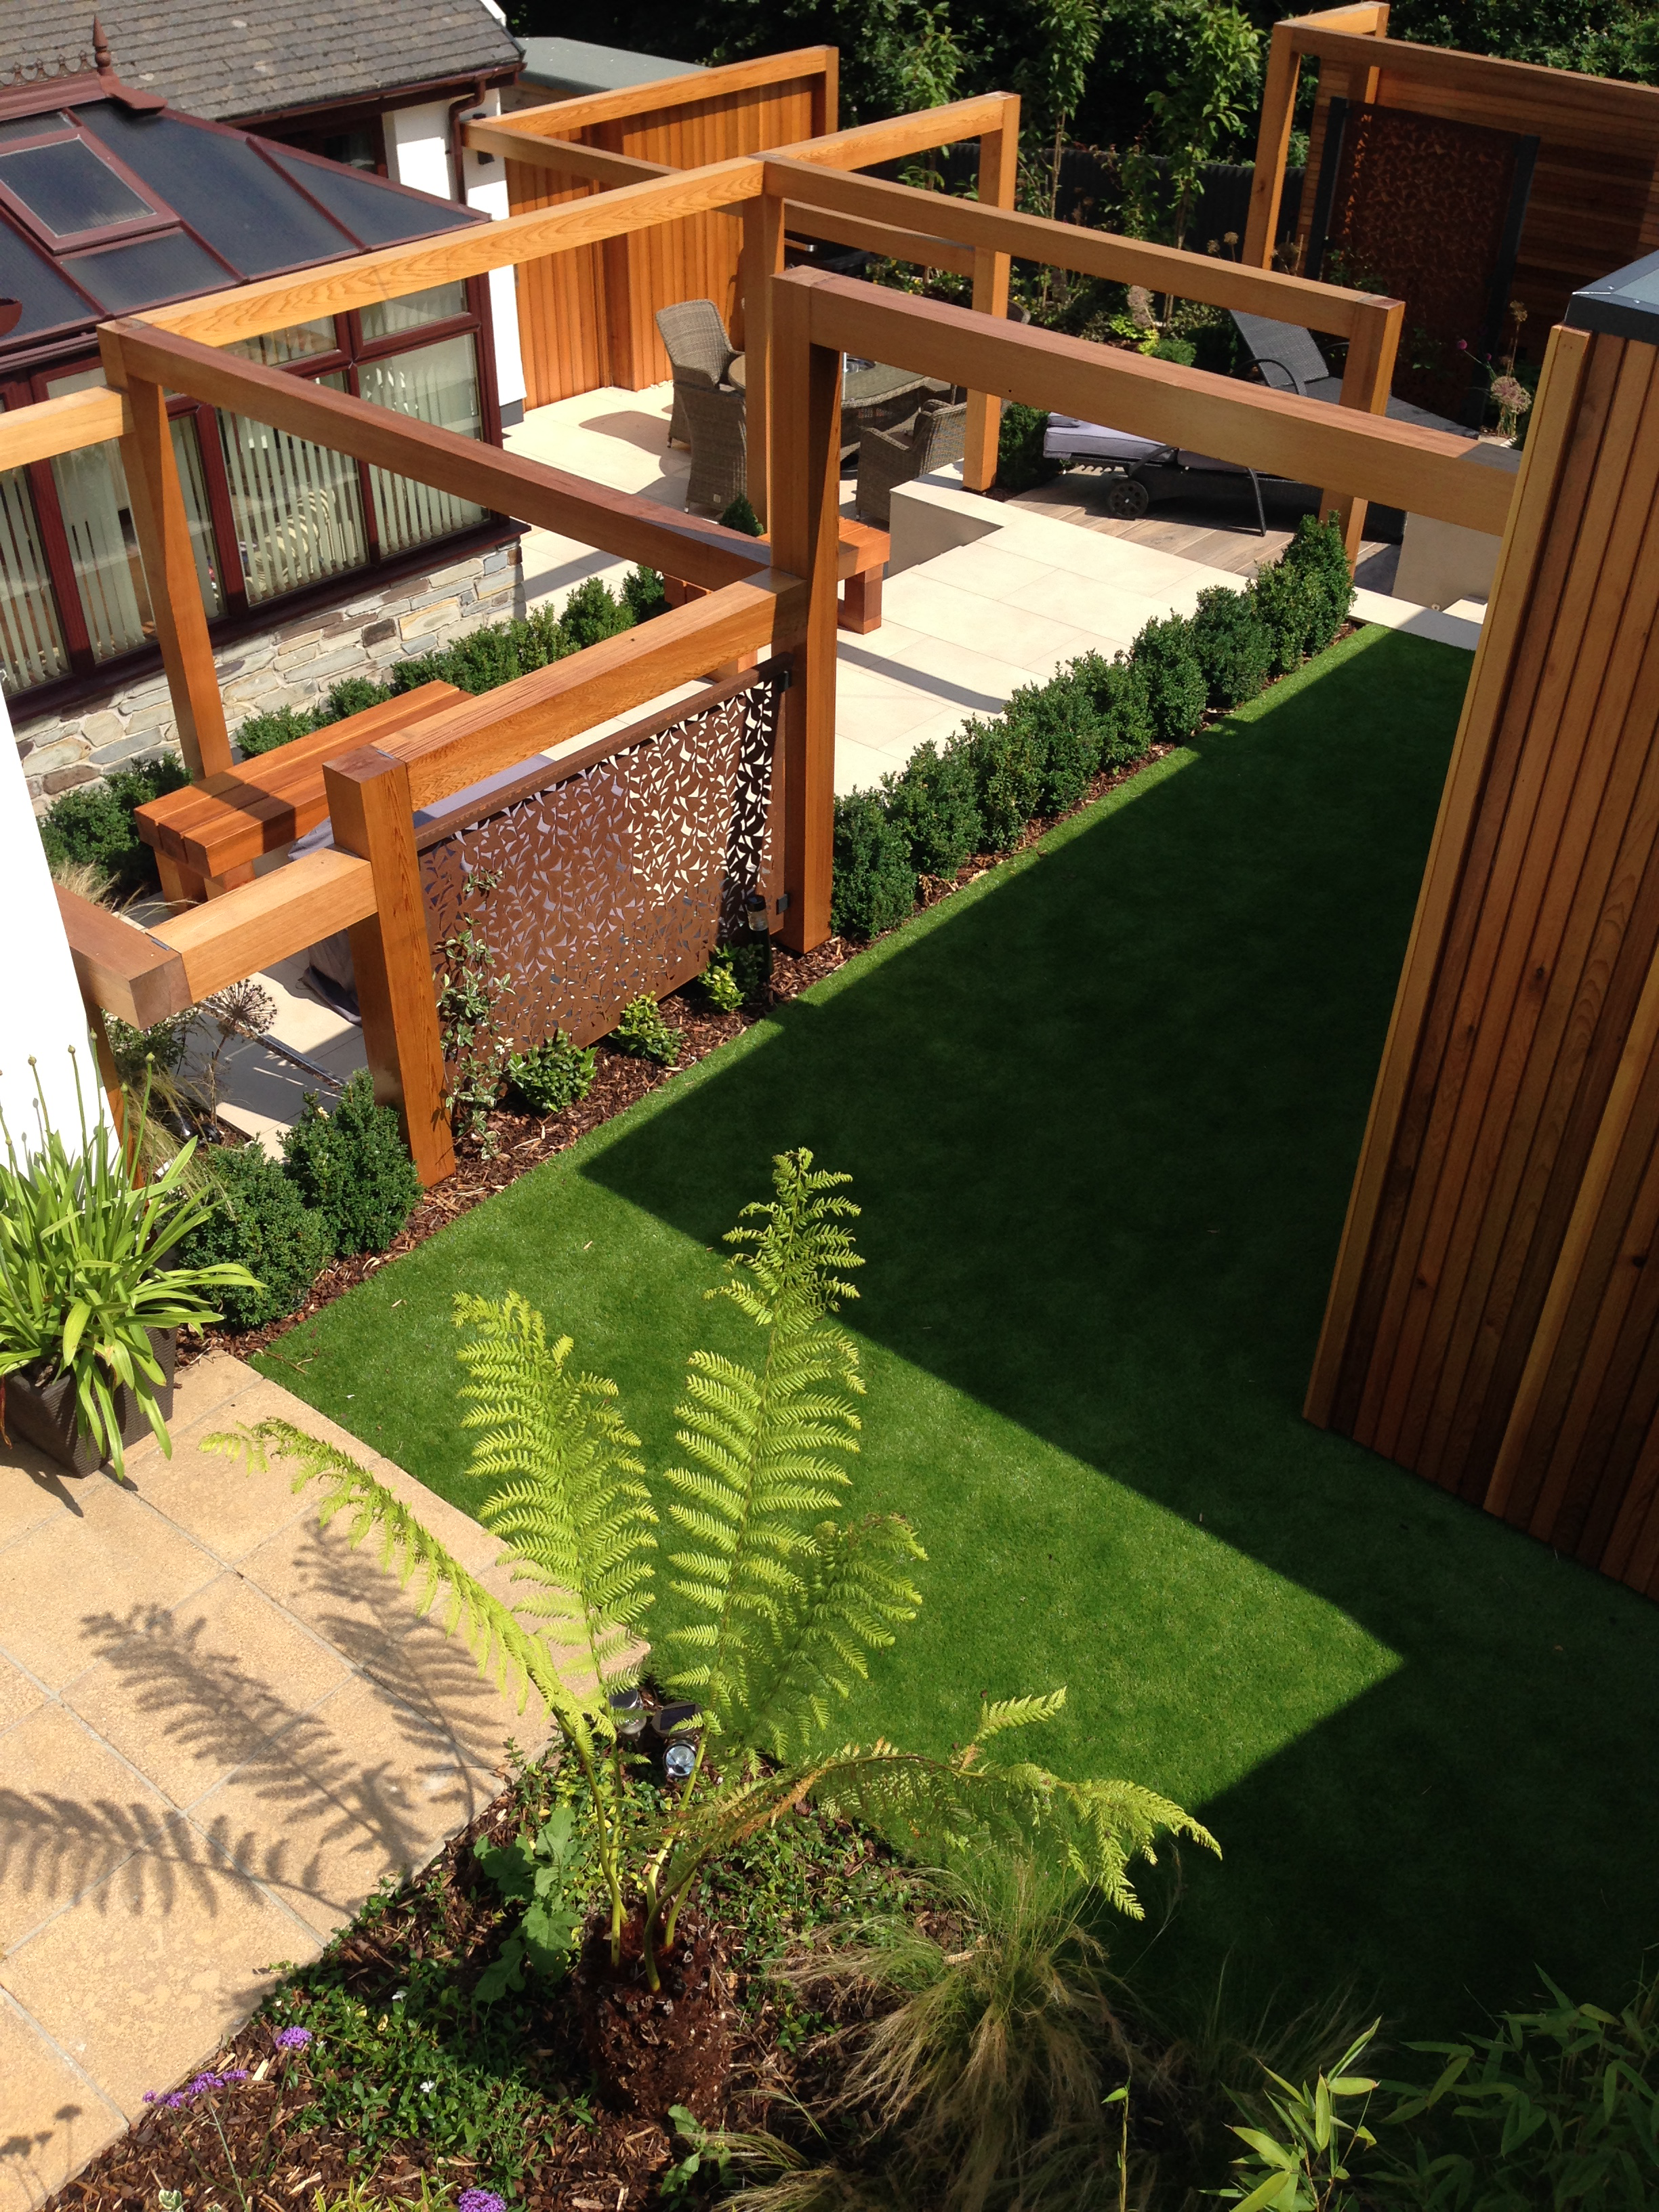 Looking down into the new contemporary garden with view of the tree fern and artificial grass